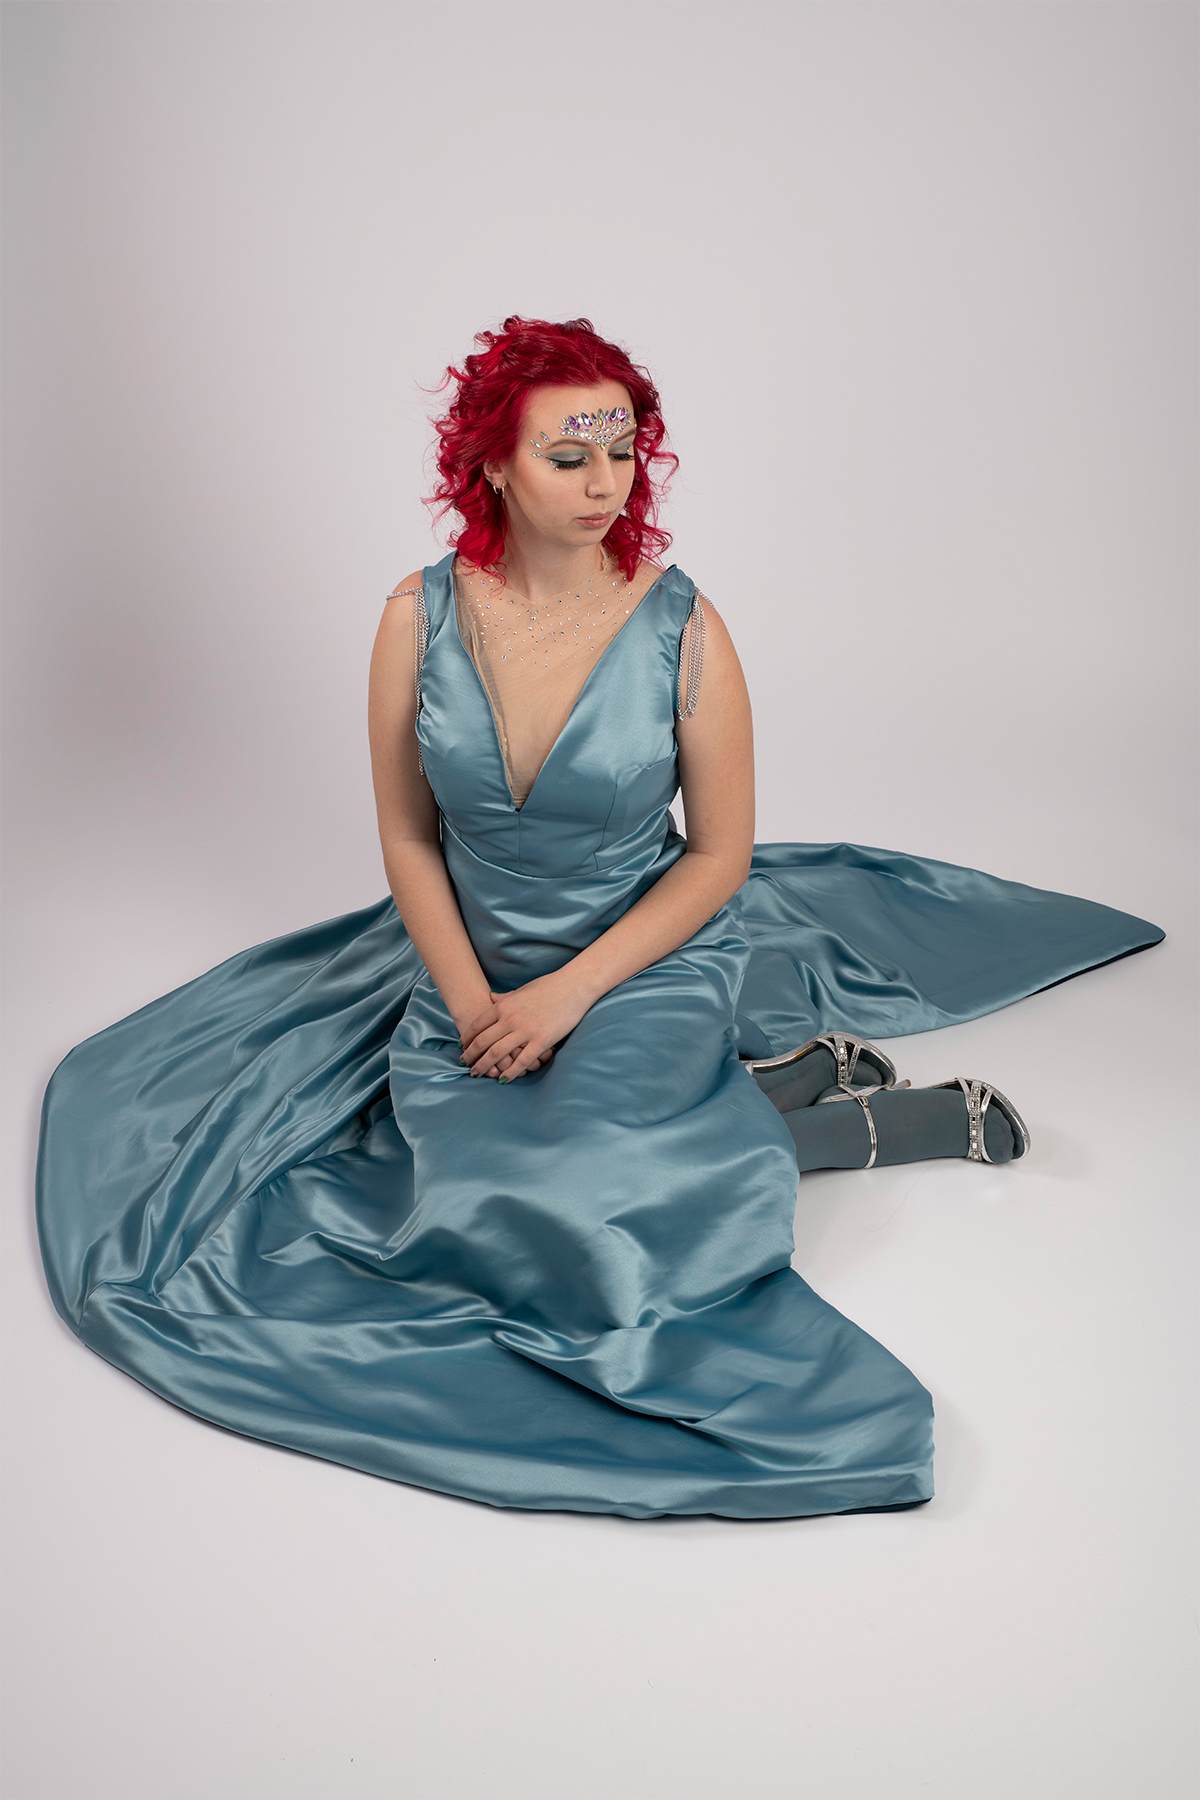 Payton Hatcher models a French blue floor-length gown with empire waistline, accented with plunging necklines with crystals.